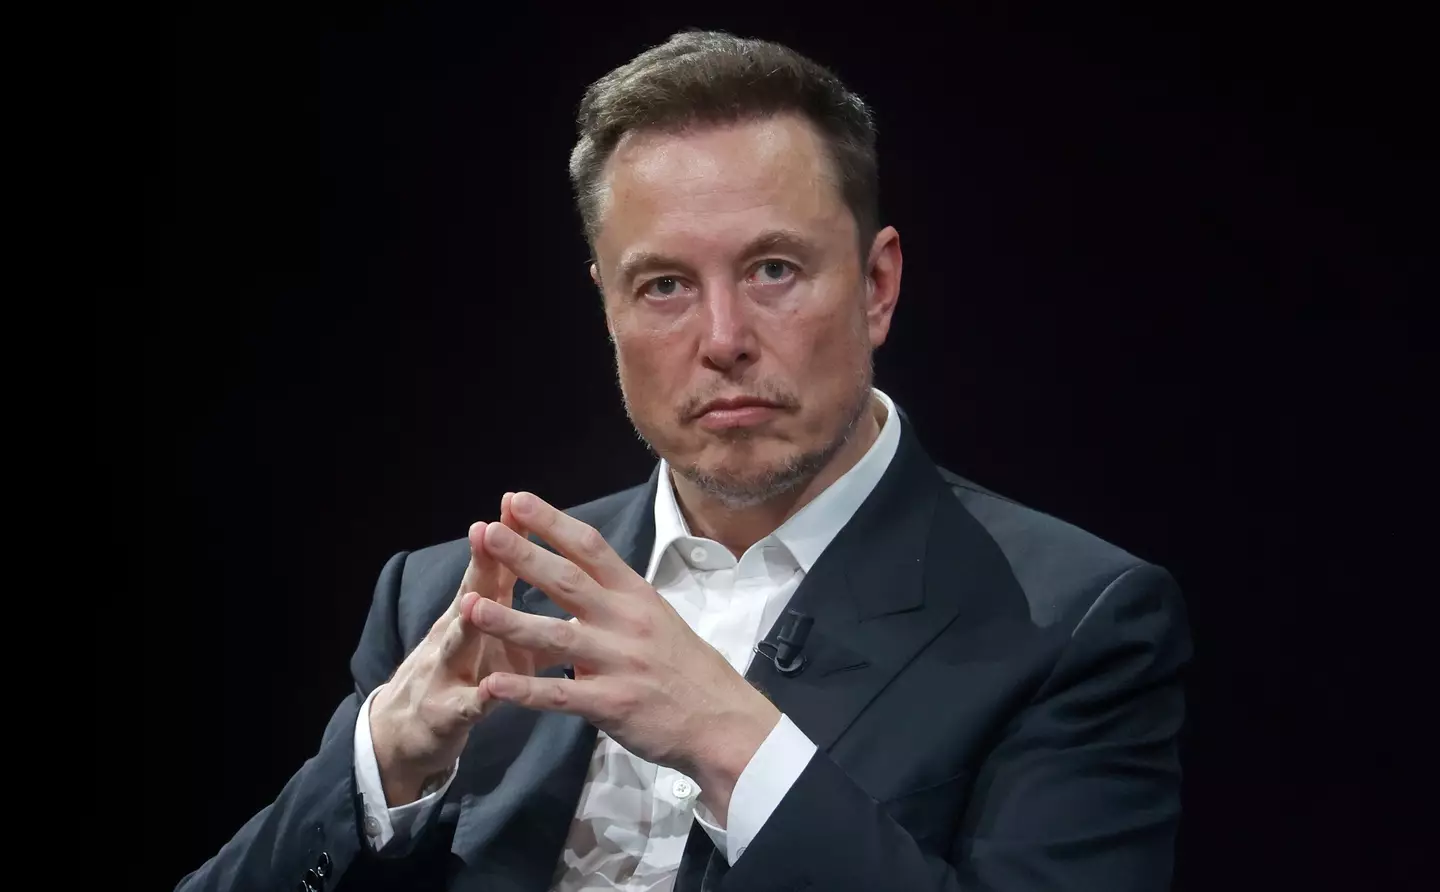 Musk has previously been criticised for charging people to use the once-free platform.